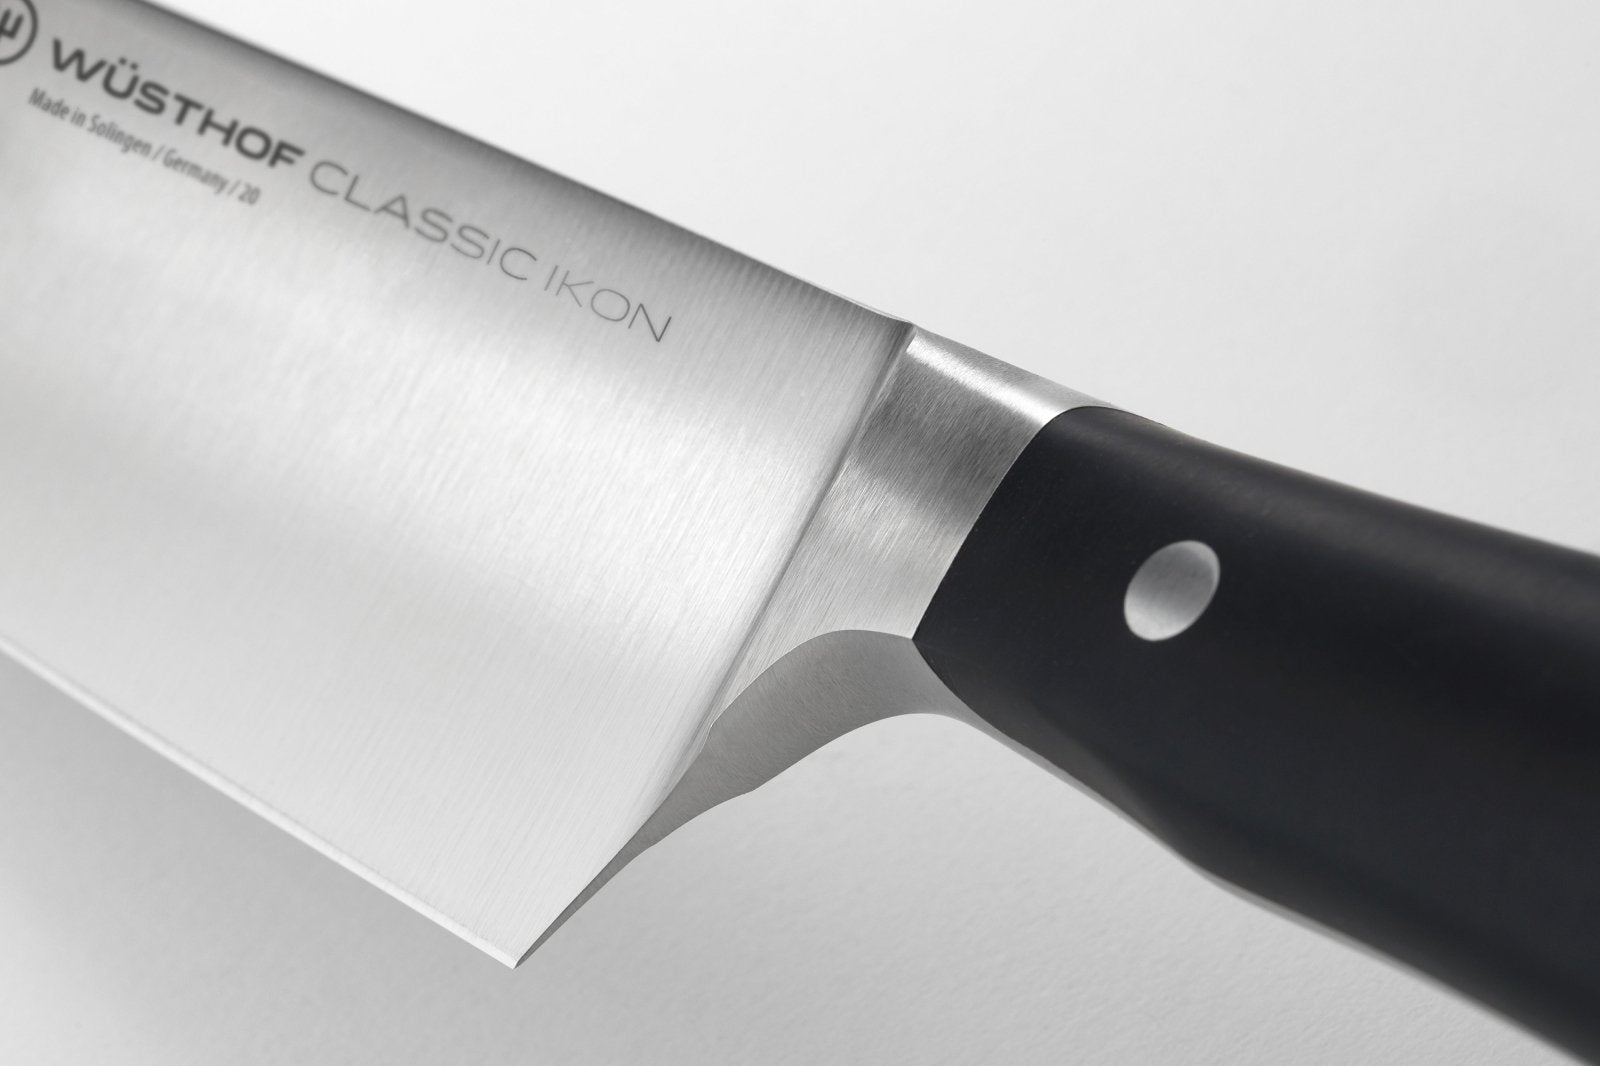 Wusthof Classic IKON 23cm Carving Knife - WT1040330723 - The Cotswold Knife Company